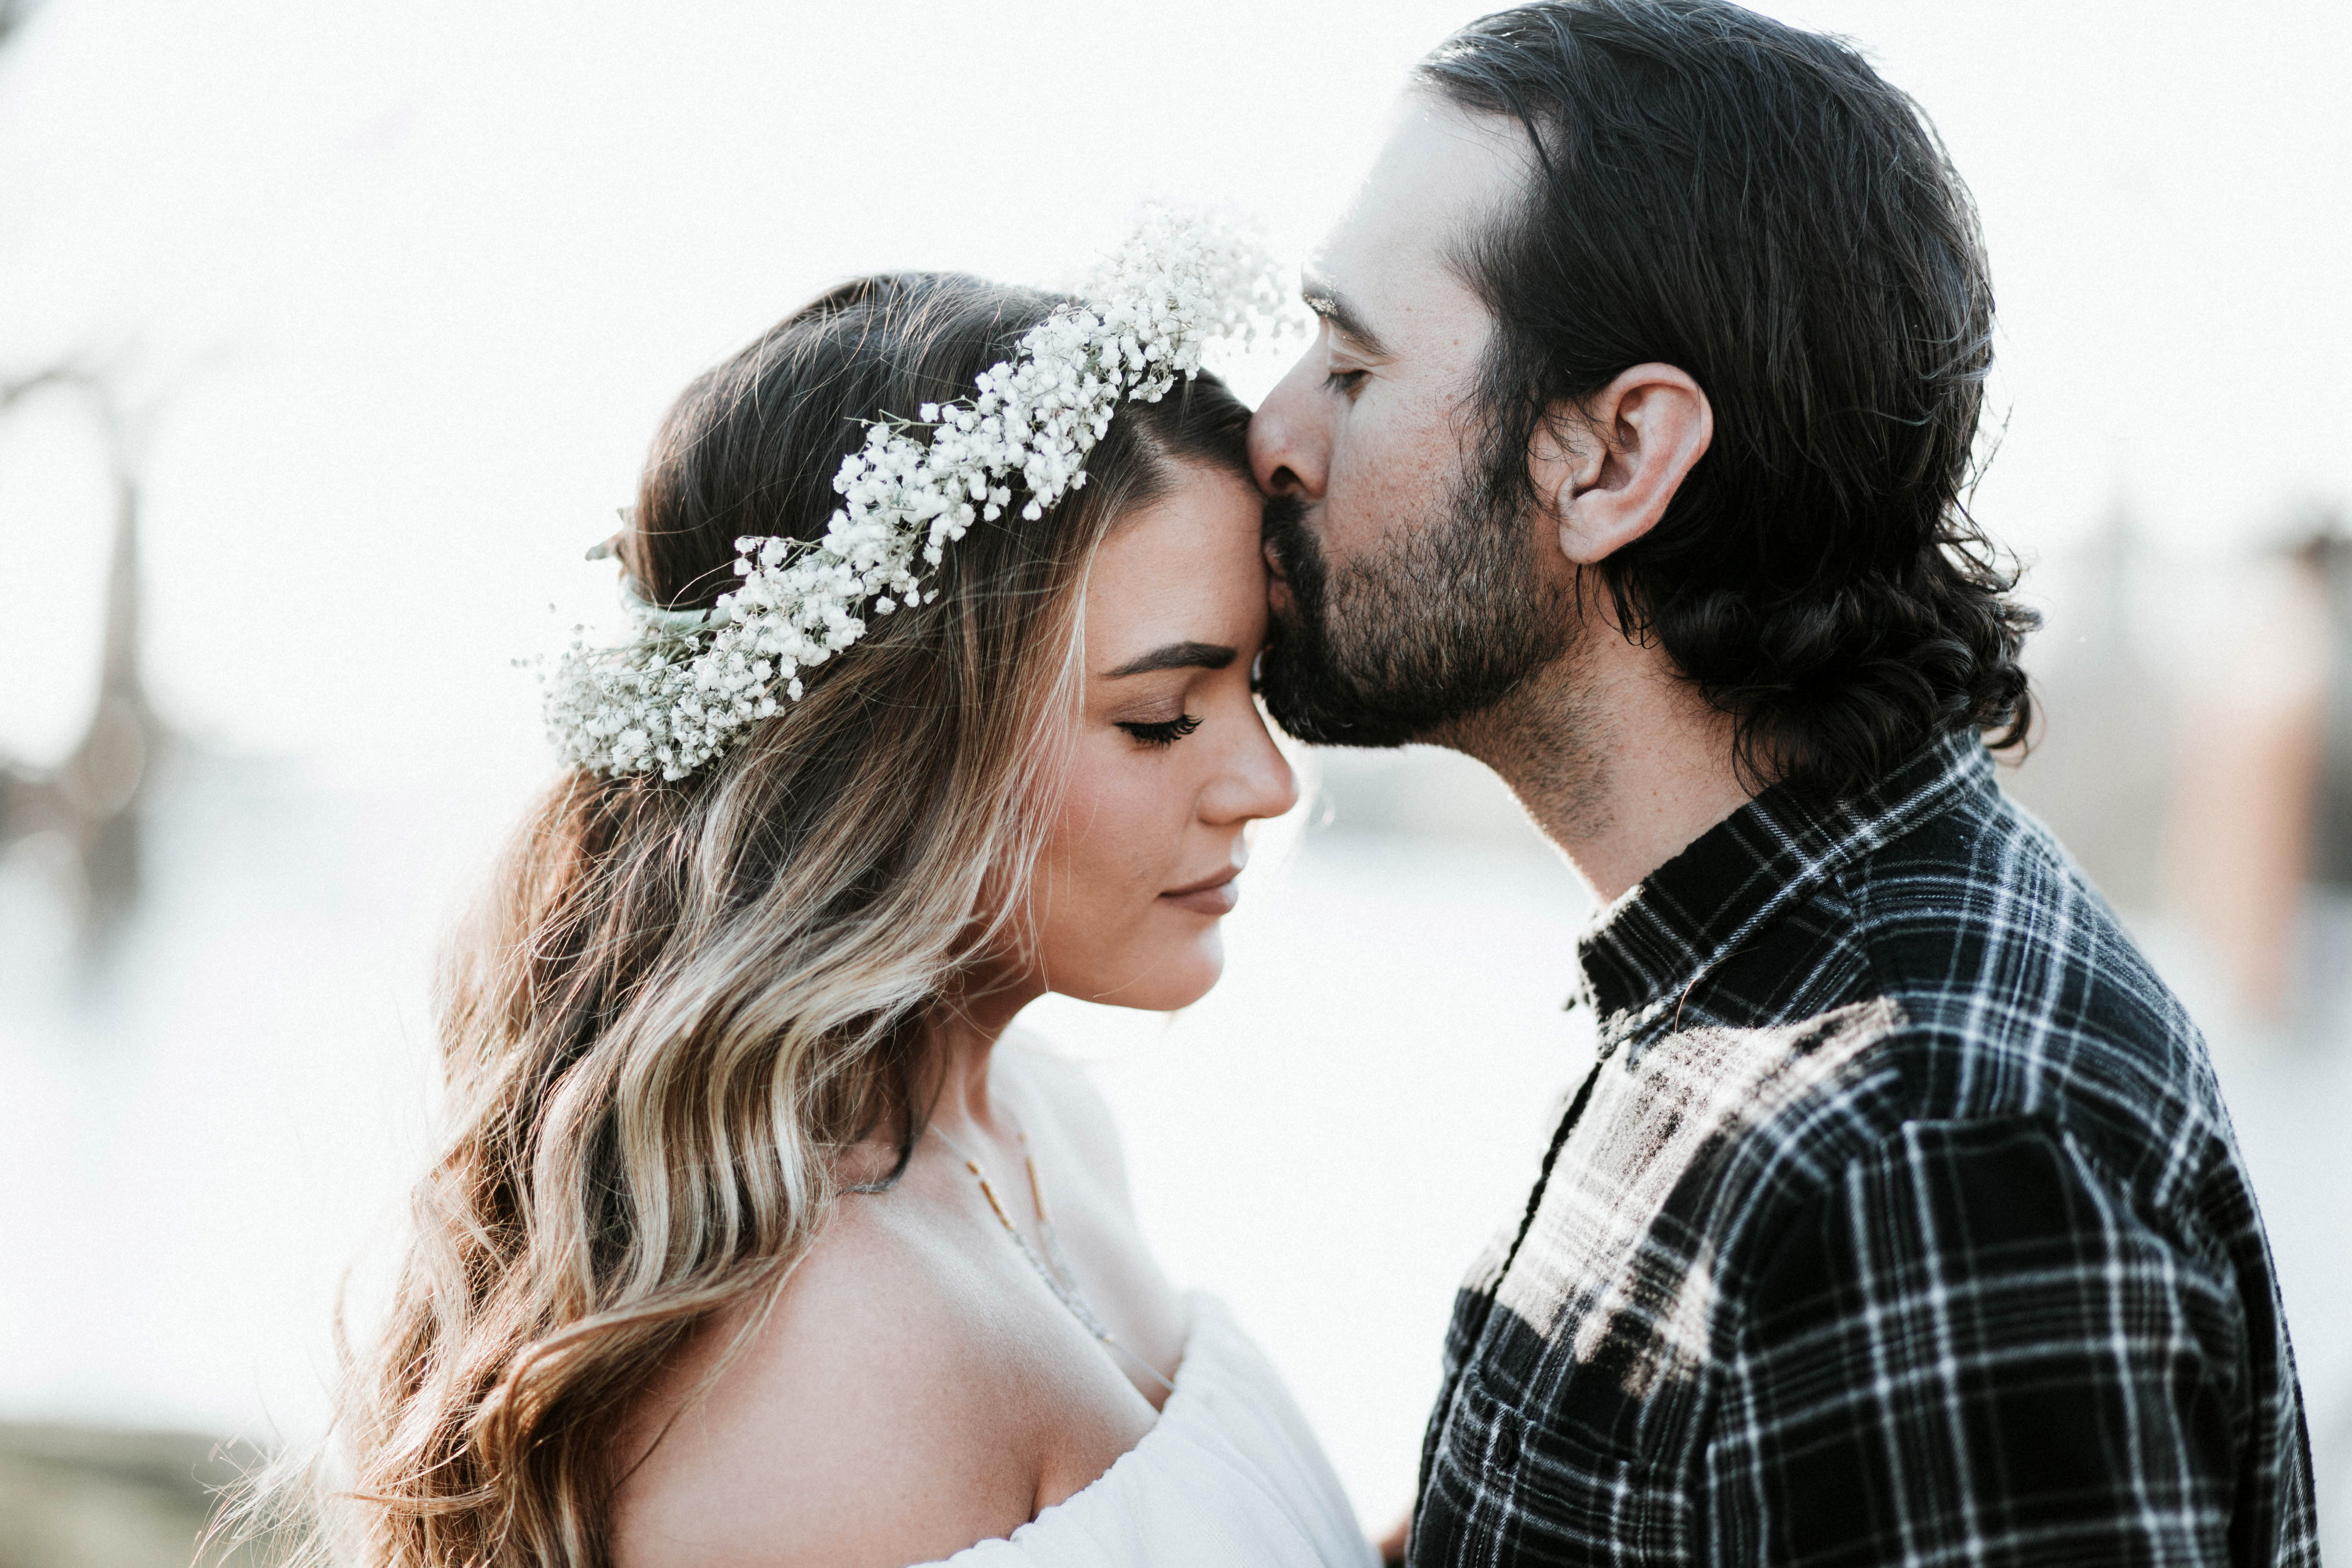 Man kissing girl with flower crown image - Free stock photo - Public ...